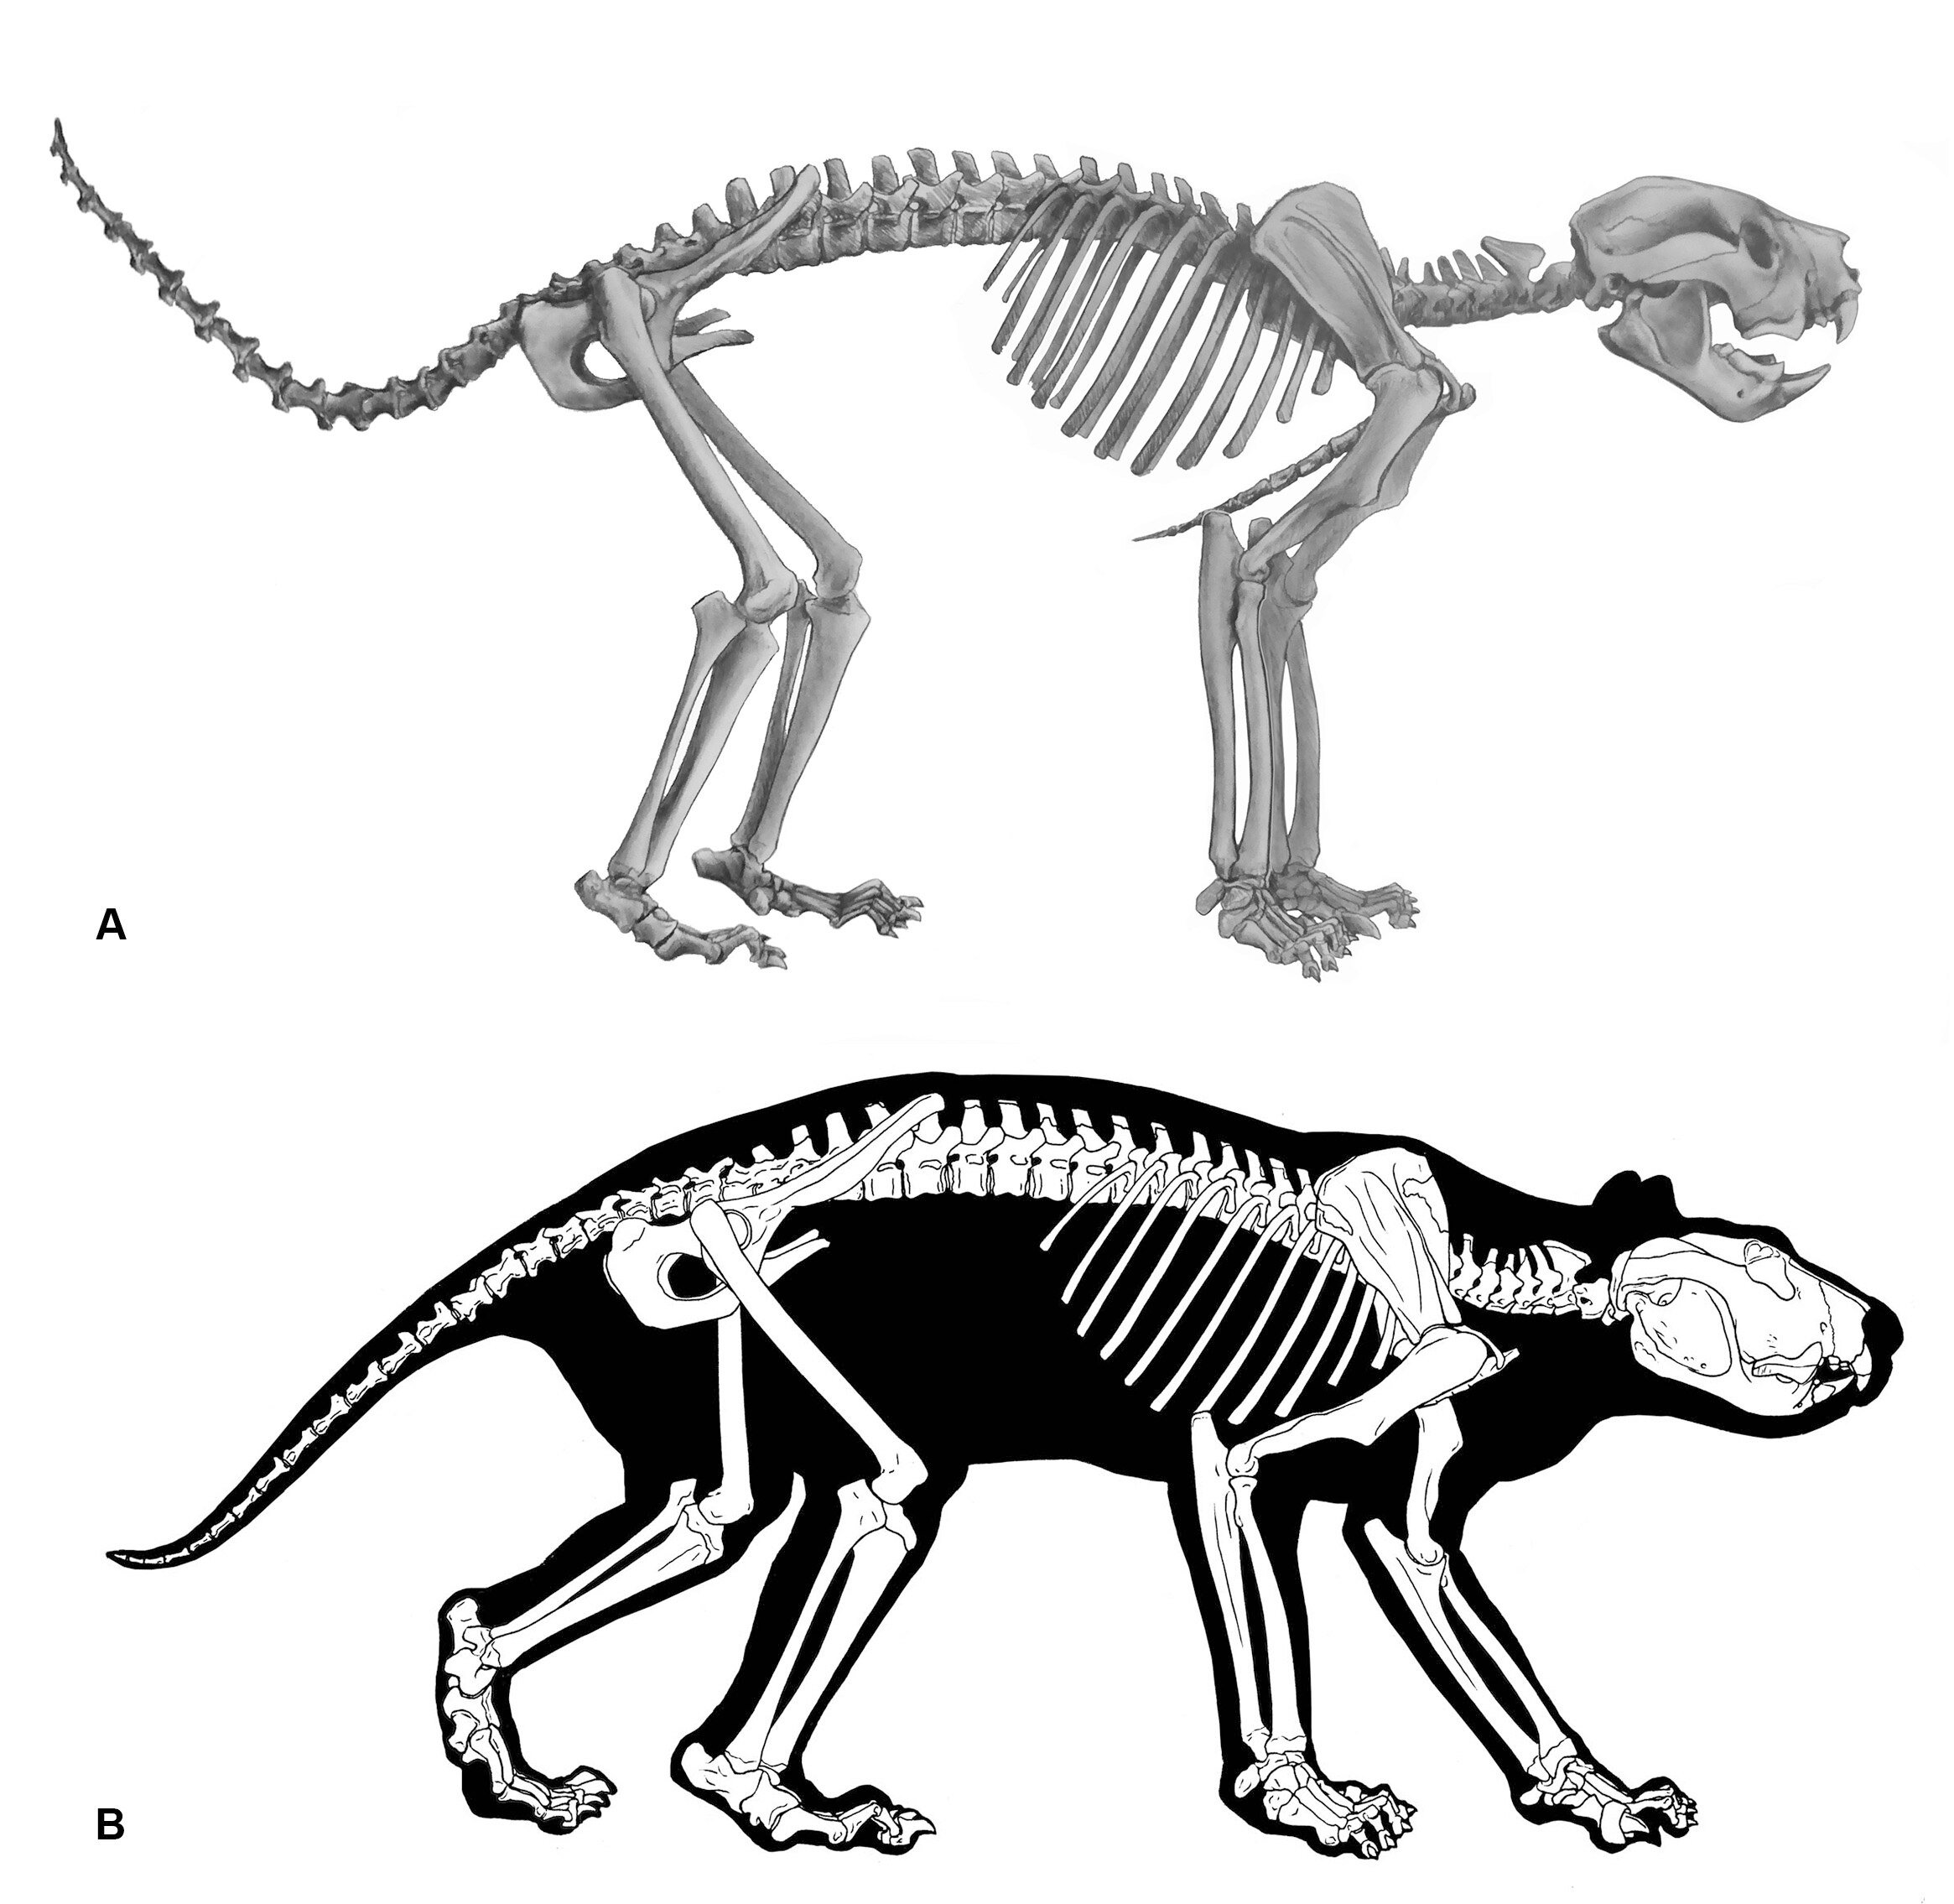 Two skeletons showing tail erect.